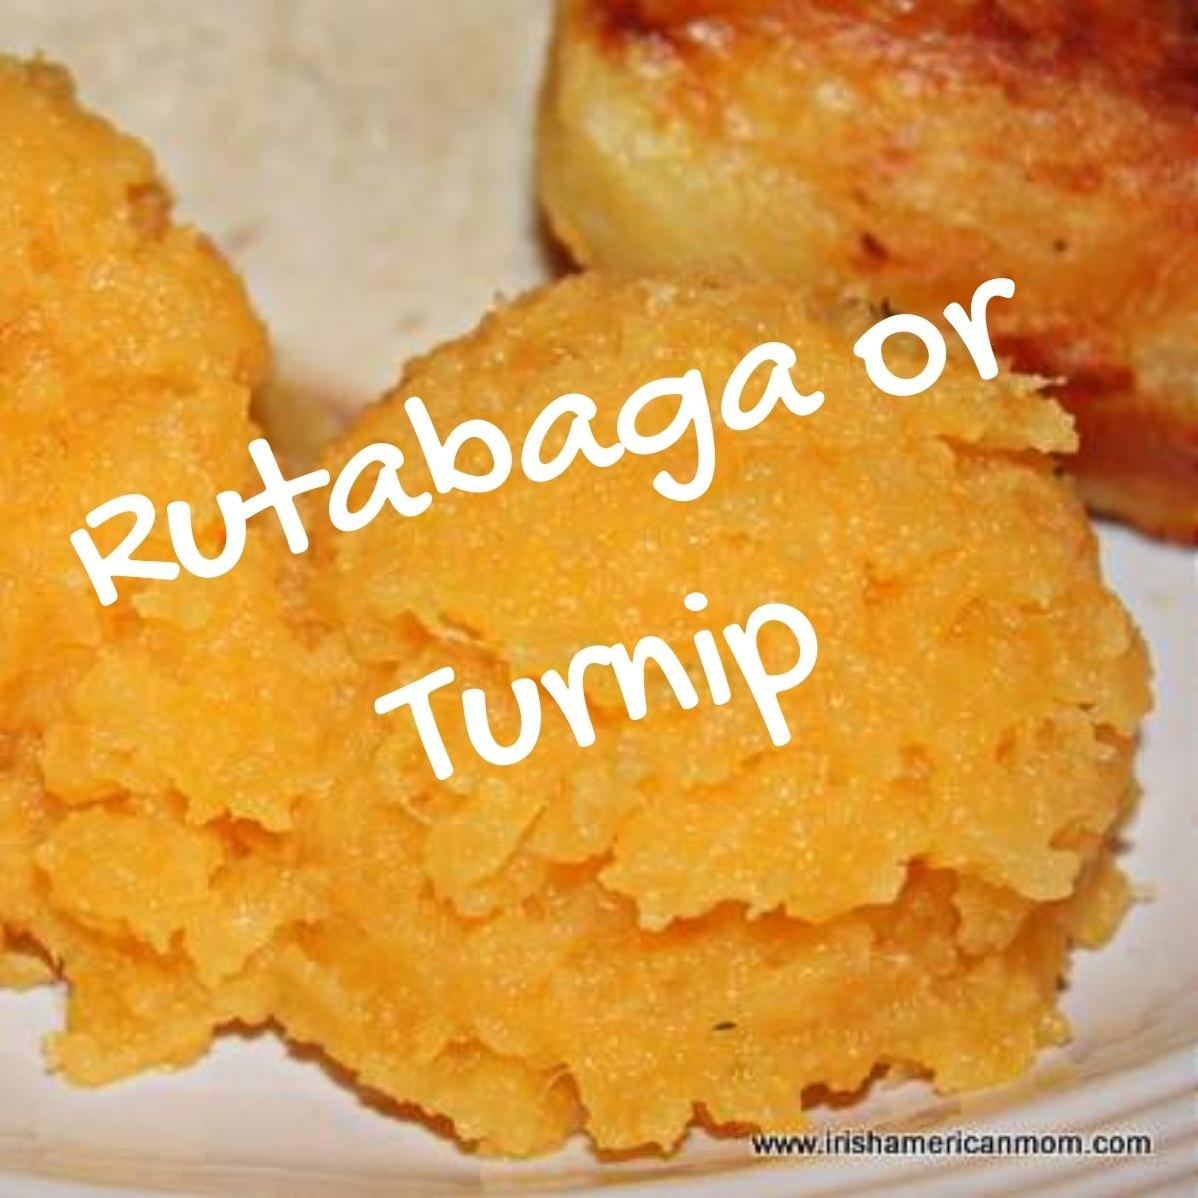  My Irish roots inspired me to create this amazing rutabaga pudding recipe that is sure to impress.